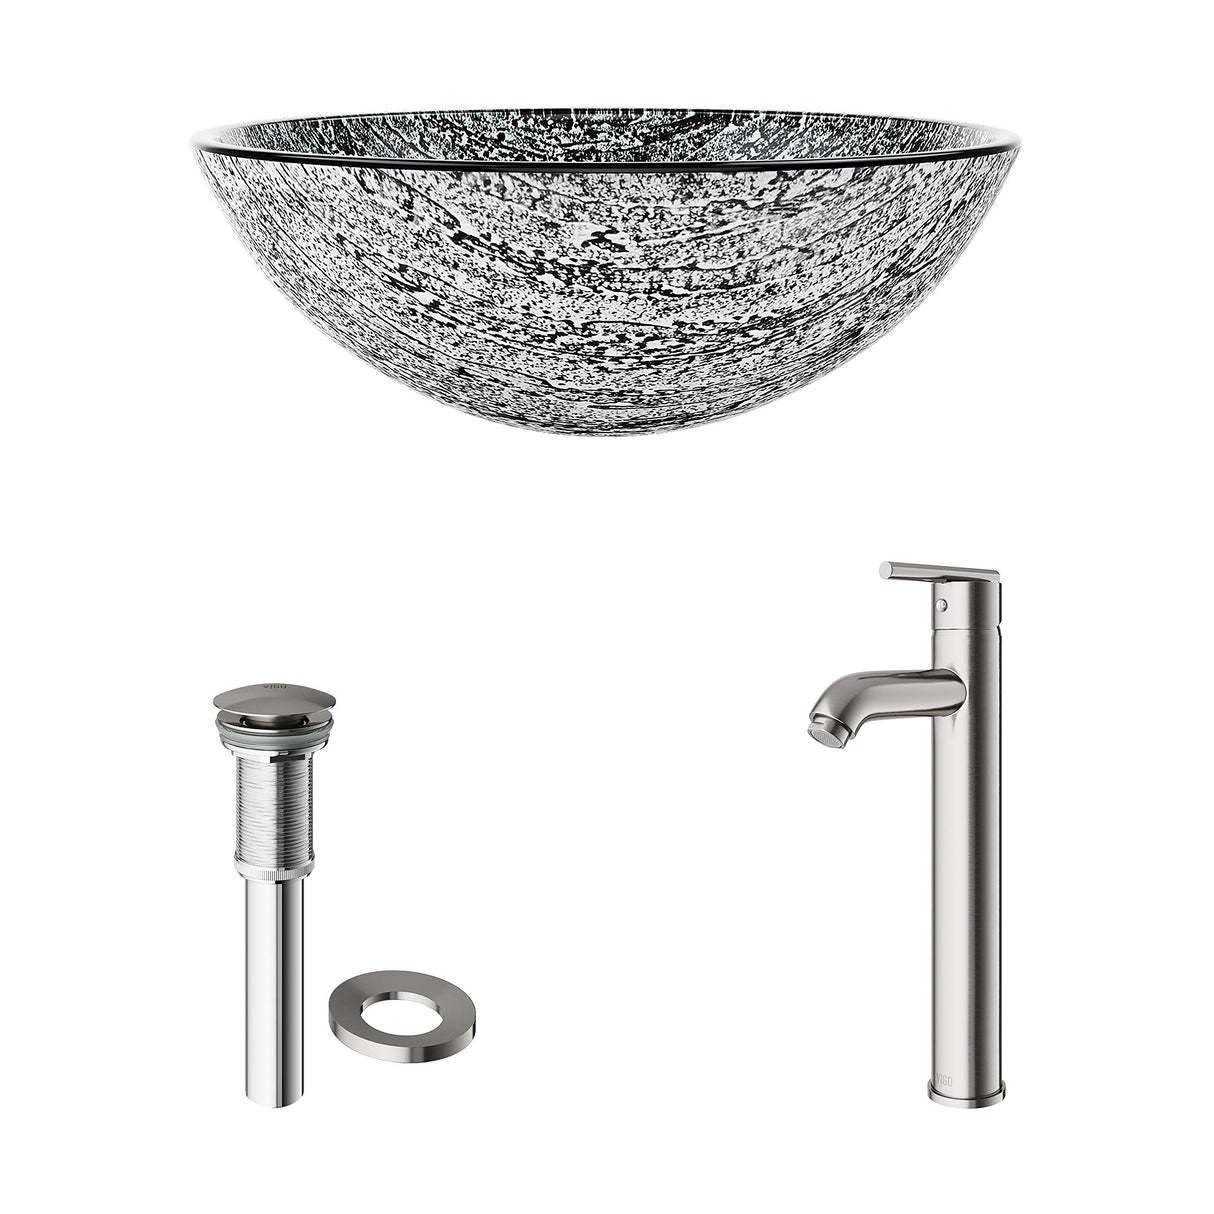 VIGO VGT827 16.5" L -16.5" W -13.0" H Titanium Handmade Glass Round Vessel Bathroom Sink Set in Slate Grey Finish with Brushed Nickel Single-Handle Single Hole Faucet and Pop Up Drain